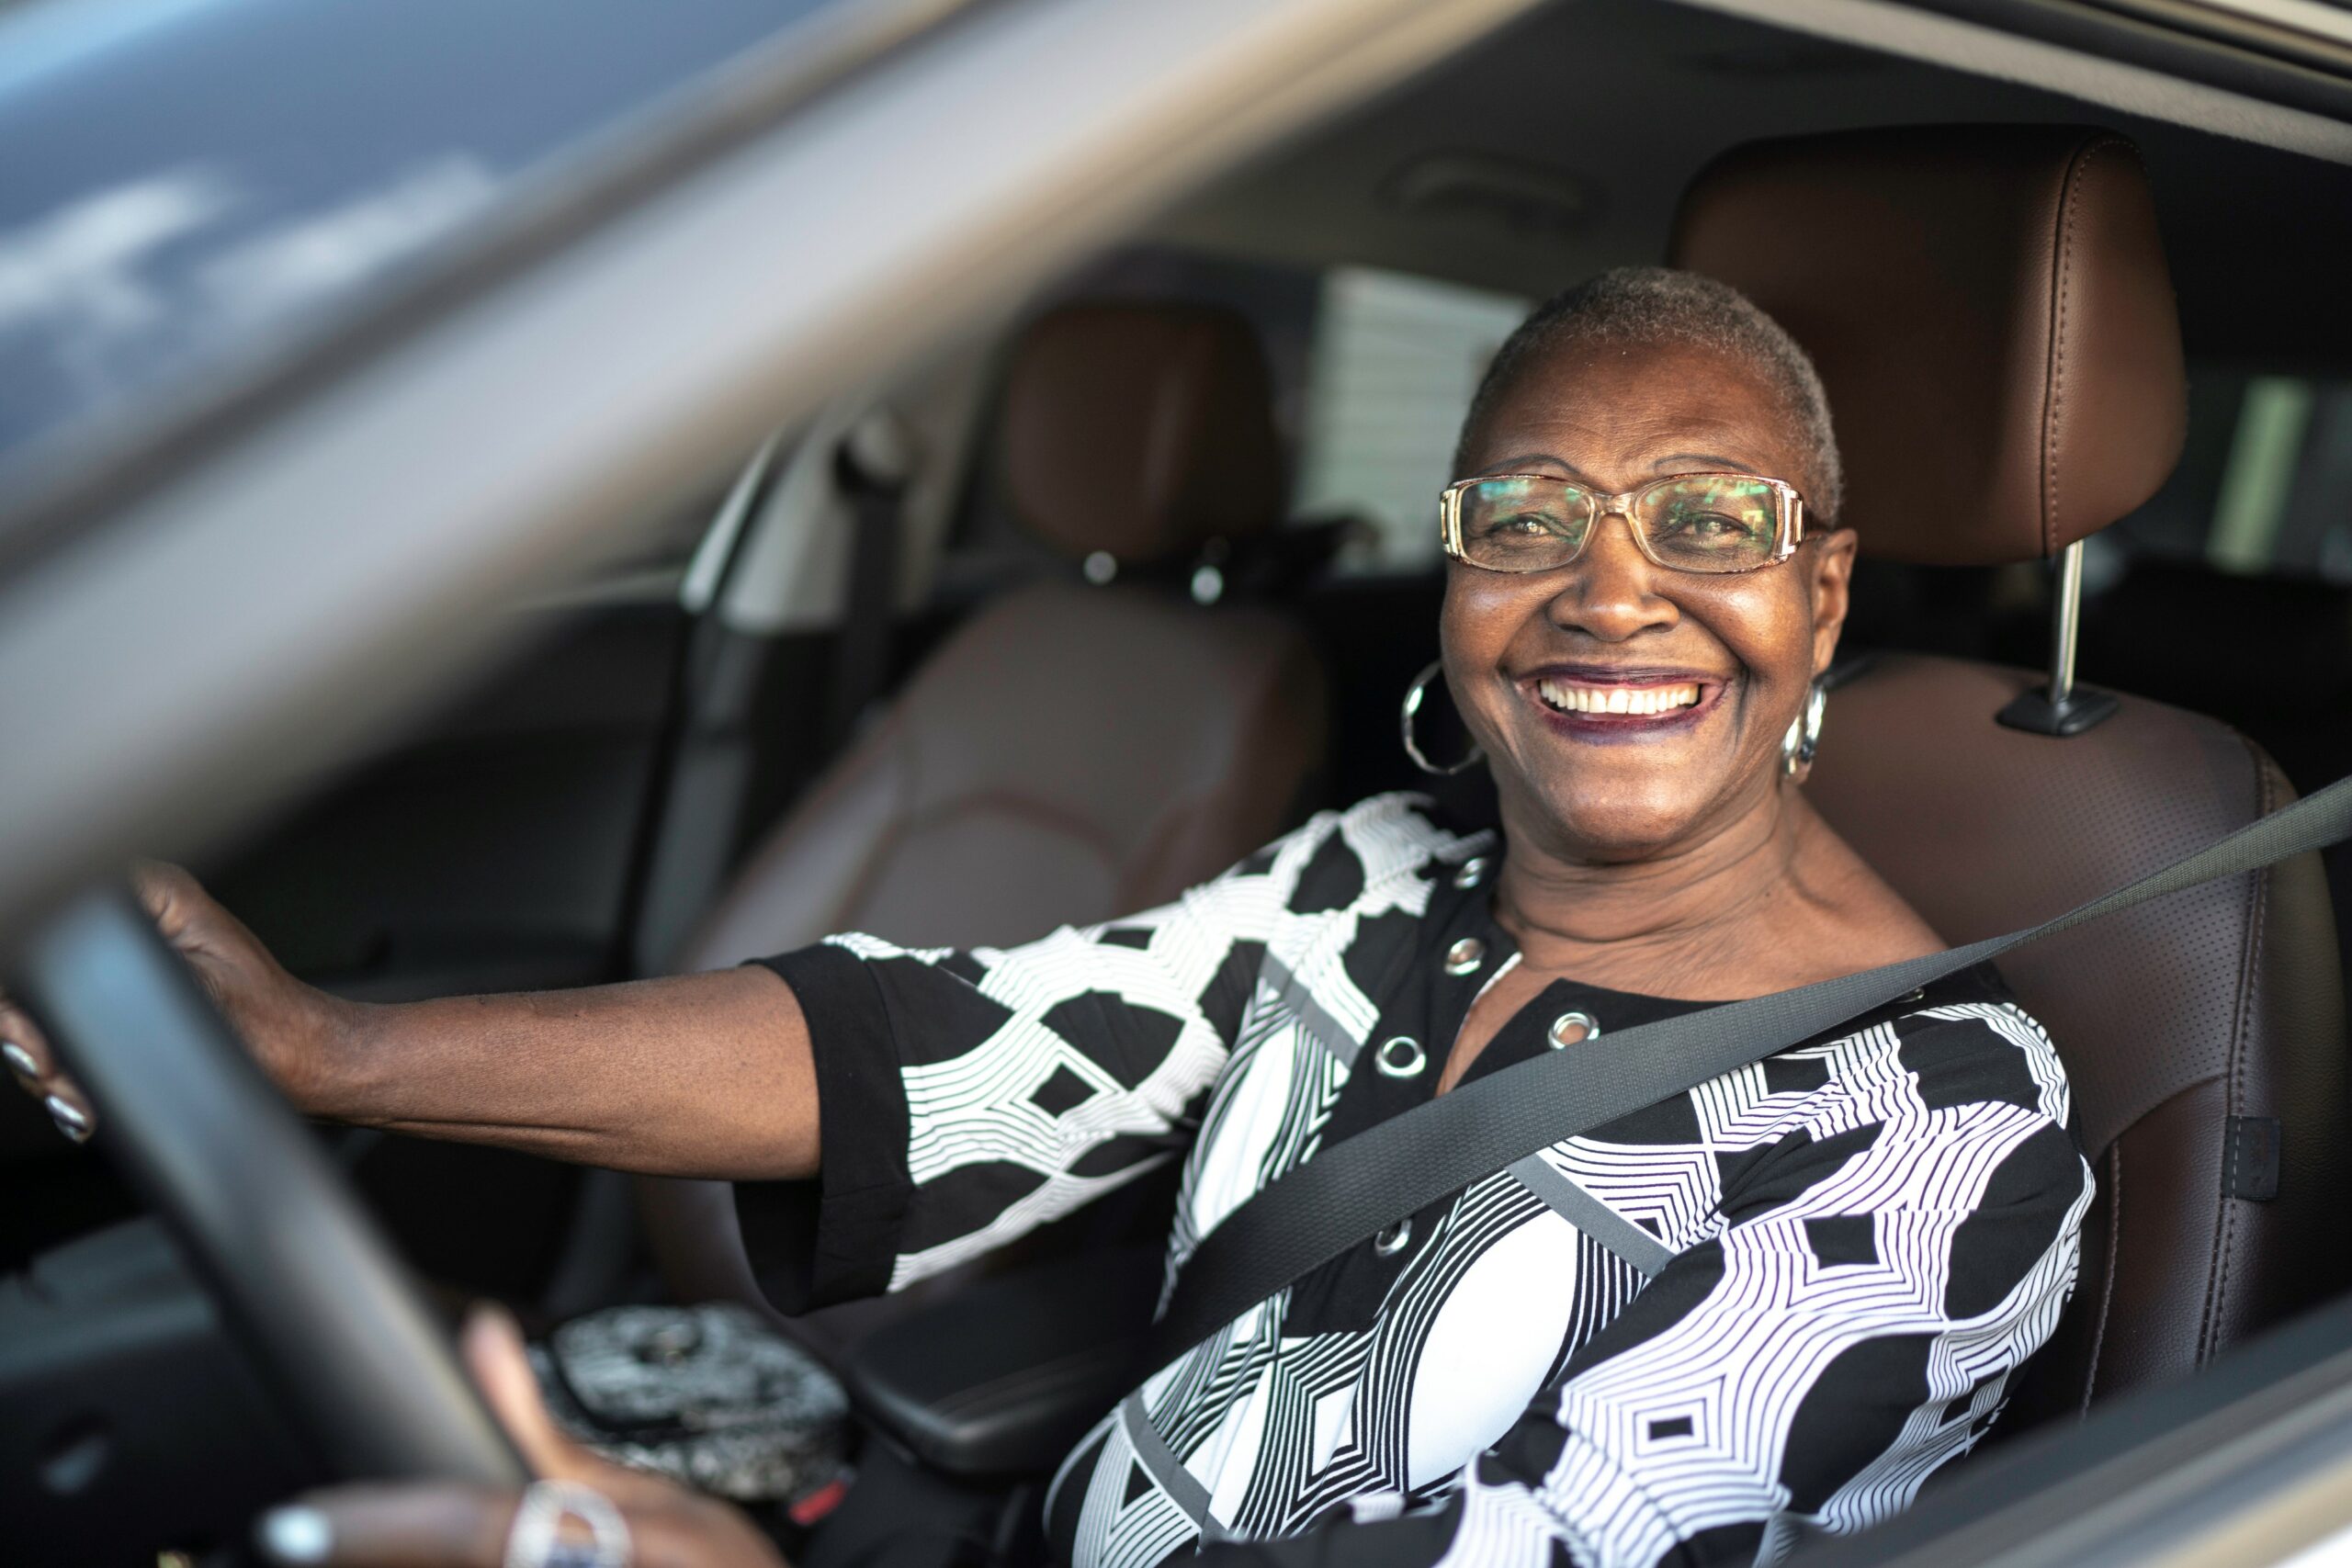 Older drivers are becoming more commonplace. Learn to recognize signs that can put older drivers at risk.